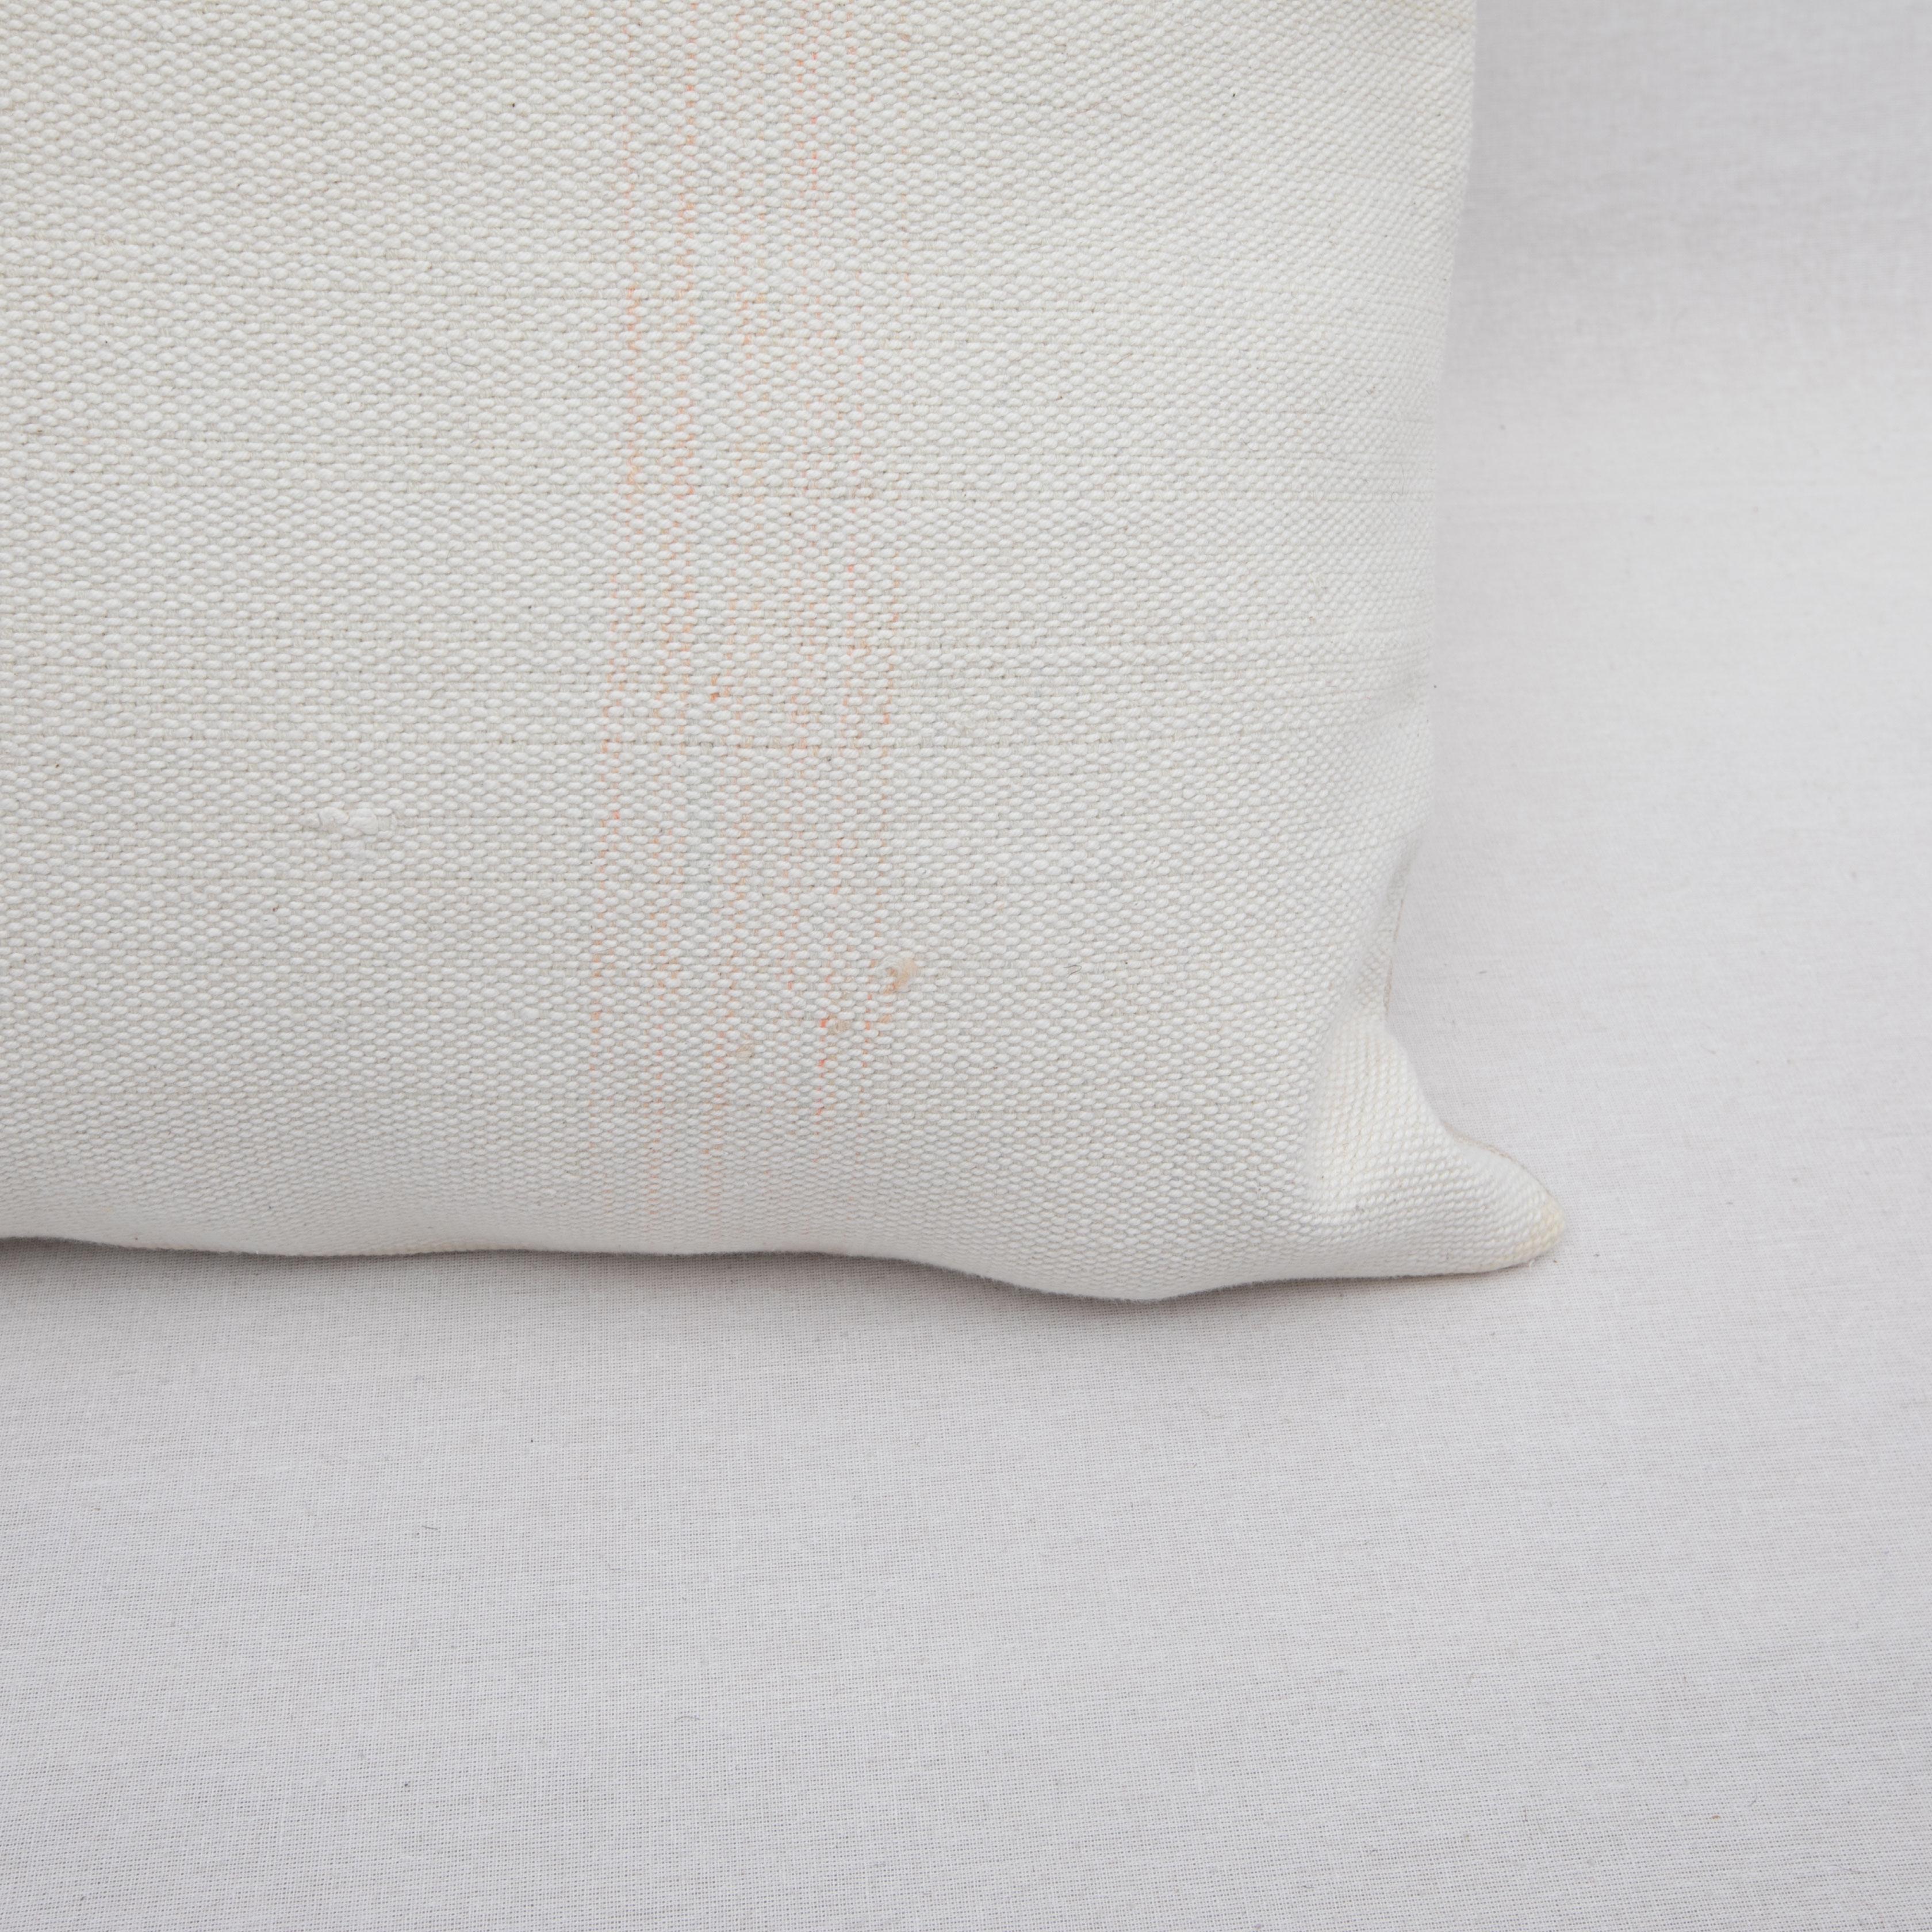 Embroidered Ivory Pillow Case Fashioned from a Vintage Anatolian Coverlet, Mid 20th C For Sale